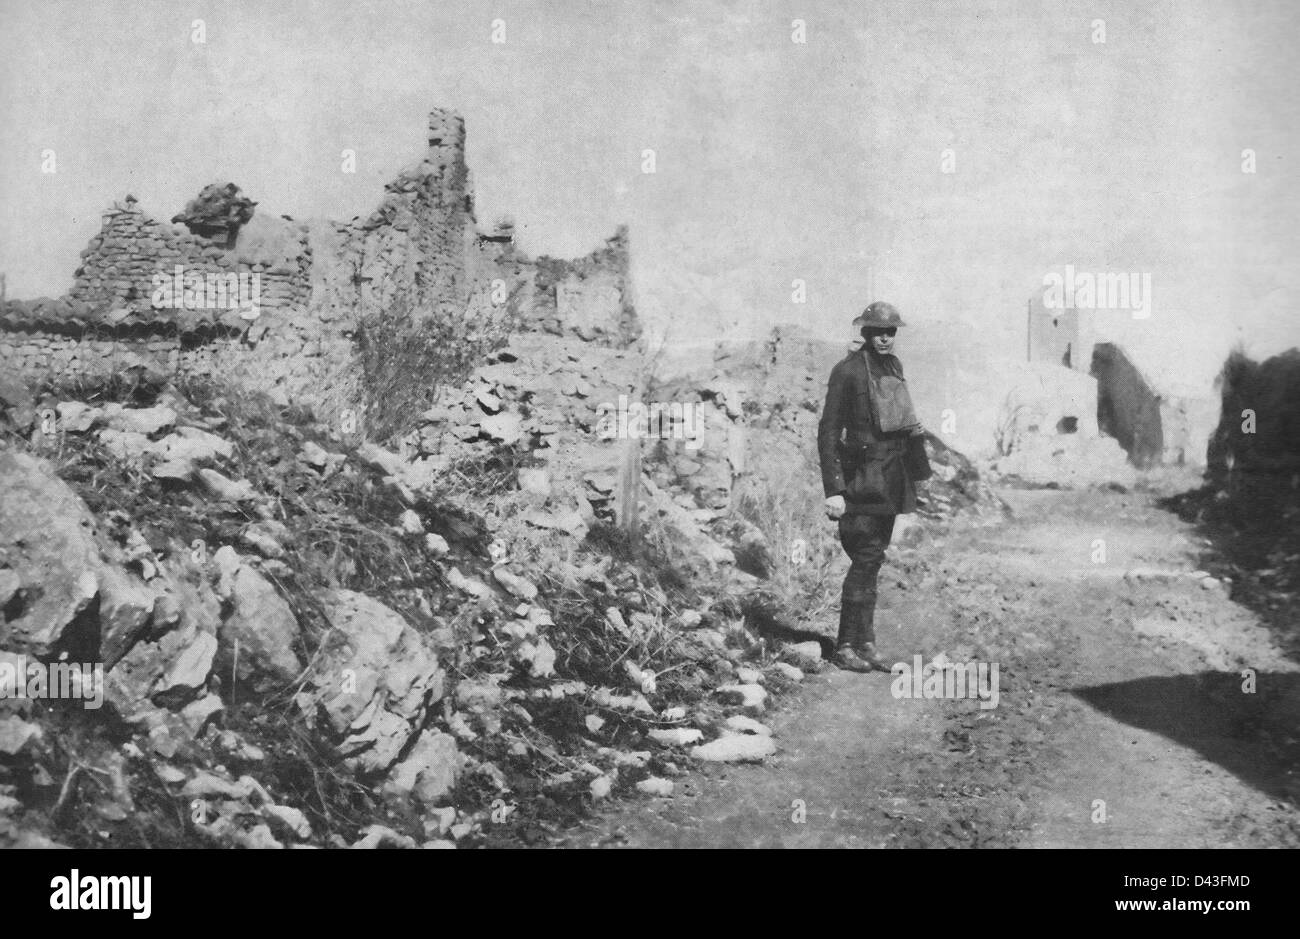 American soldier standing next to ruins in France during World War I, 1917 Stock Photo